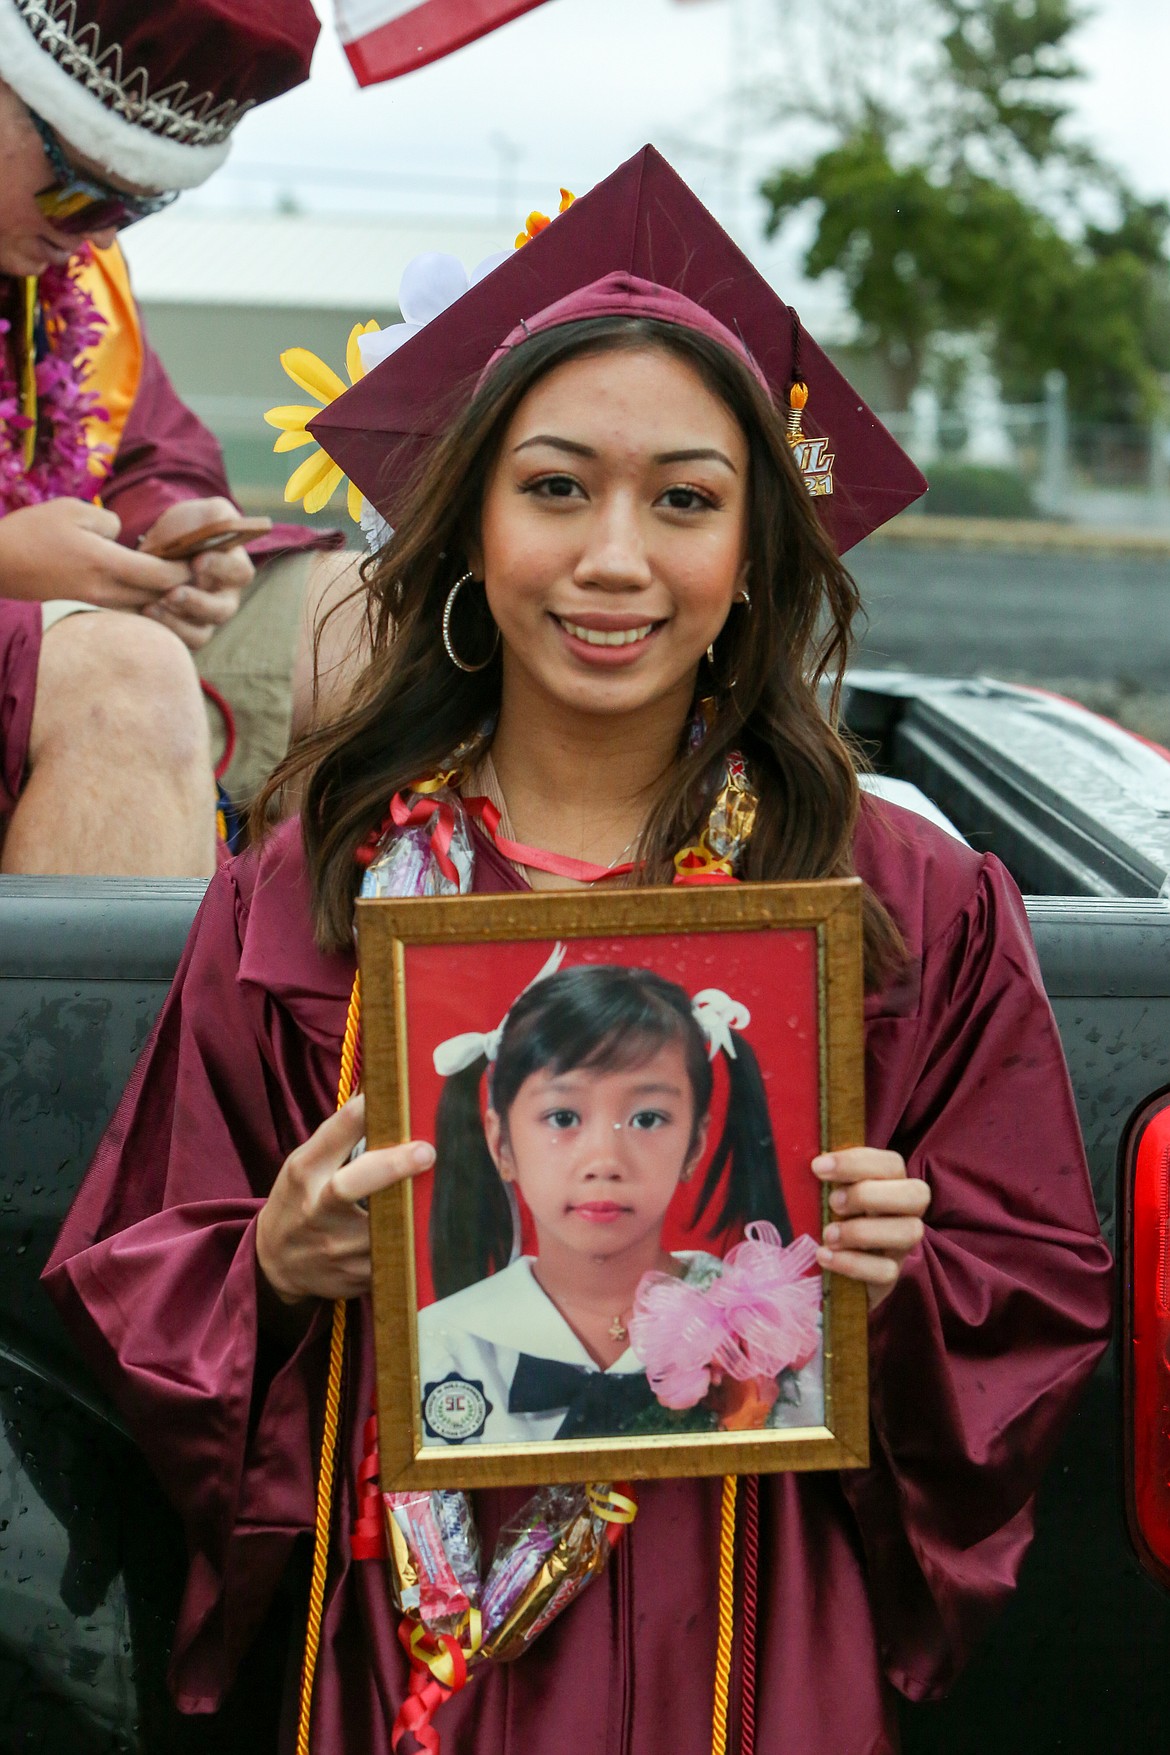 2021 Moses Lake High School graduate Chebe Yen Gesulga holds up a photo of herself as a child before Friday’s graduation ceremony as she celebrates being a part of this year’s graduating class at MLHS.